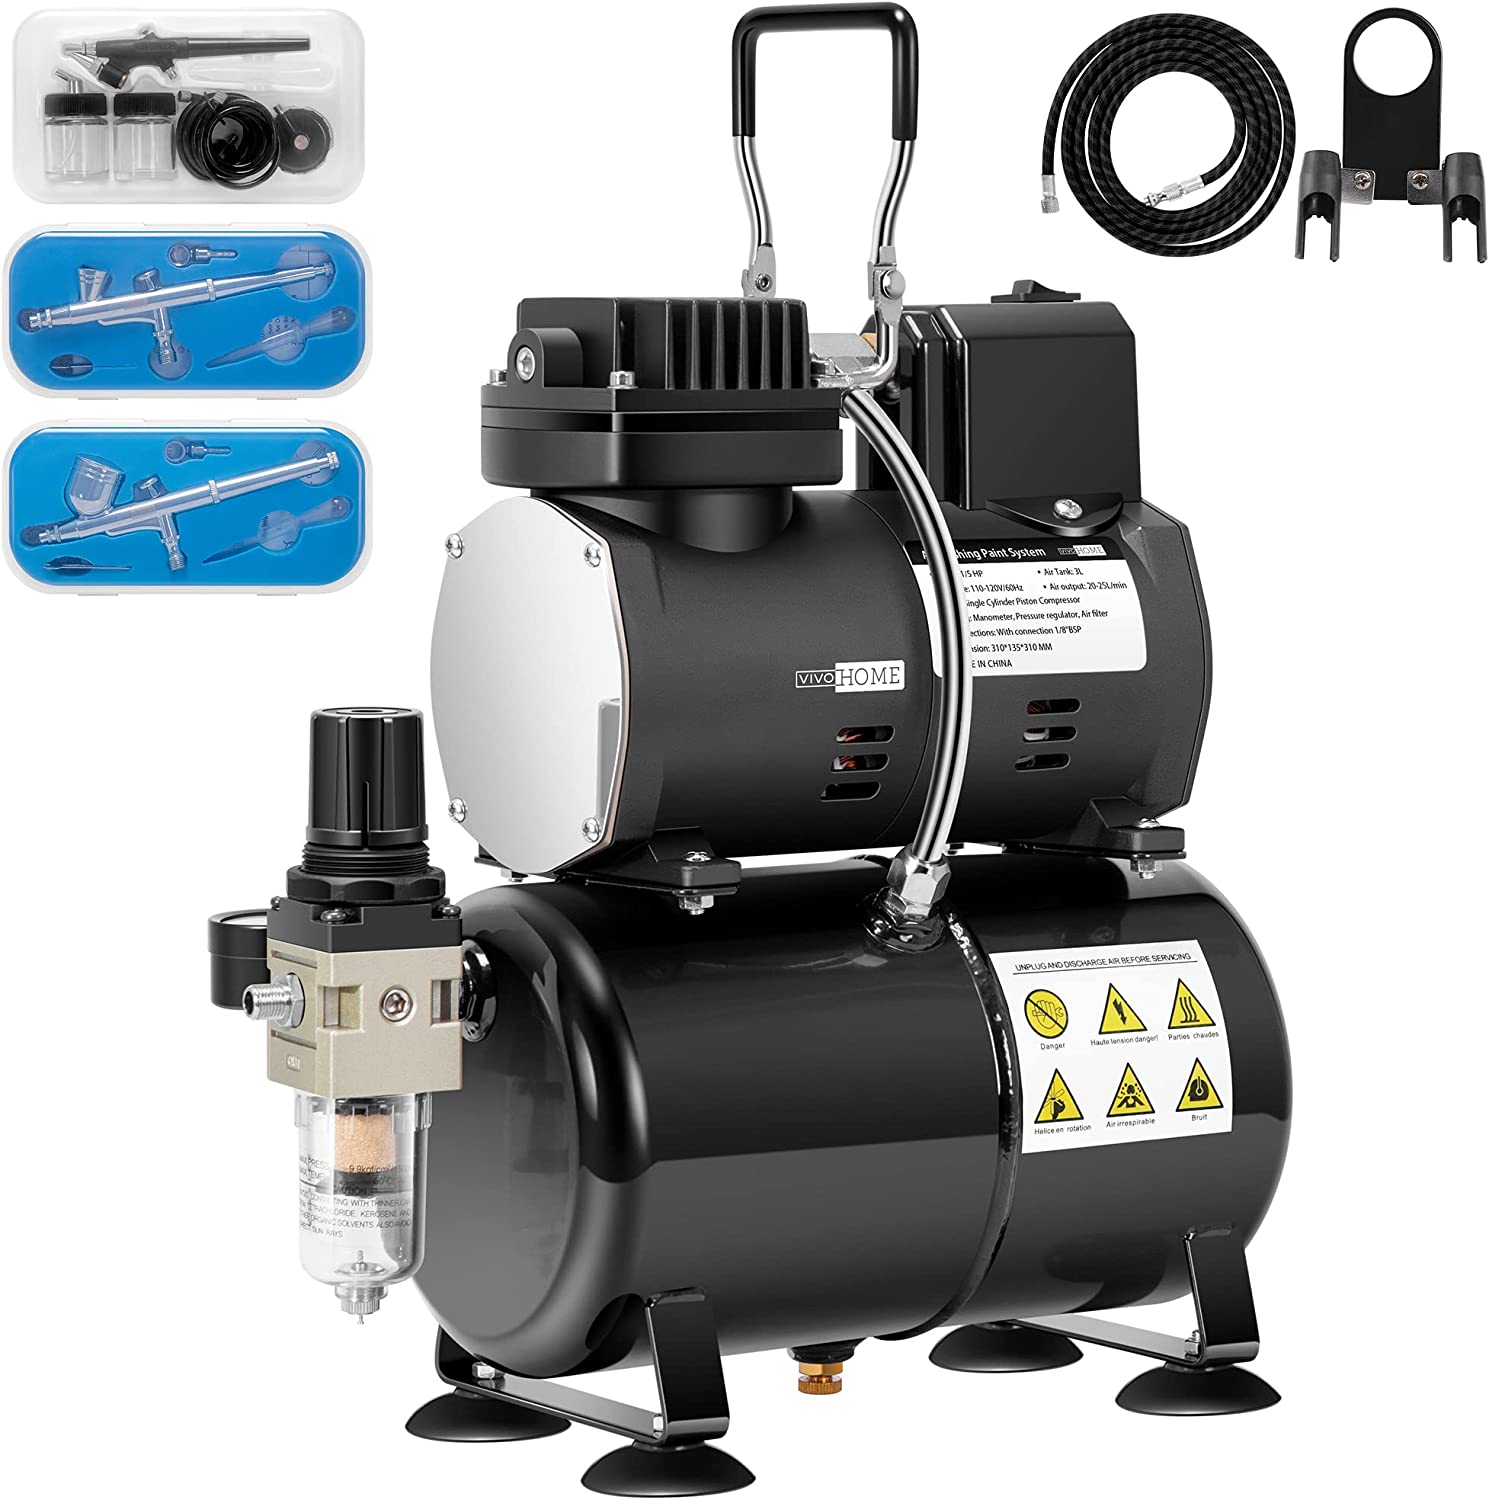 VIVOHOME Airbrush Kit with 1/5 HP Professional Air Compressor with 3L Tank